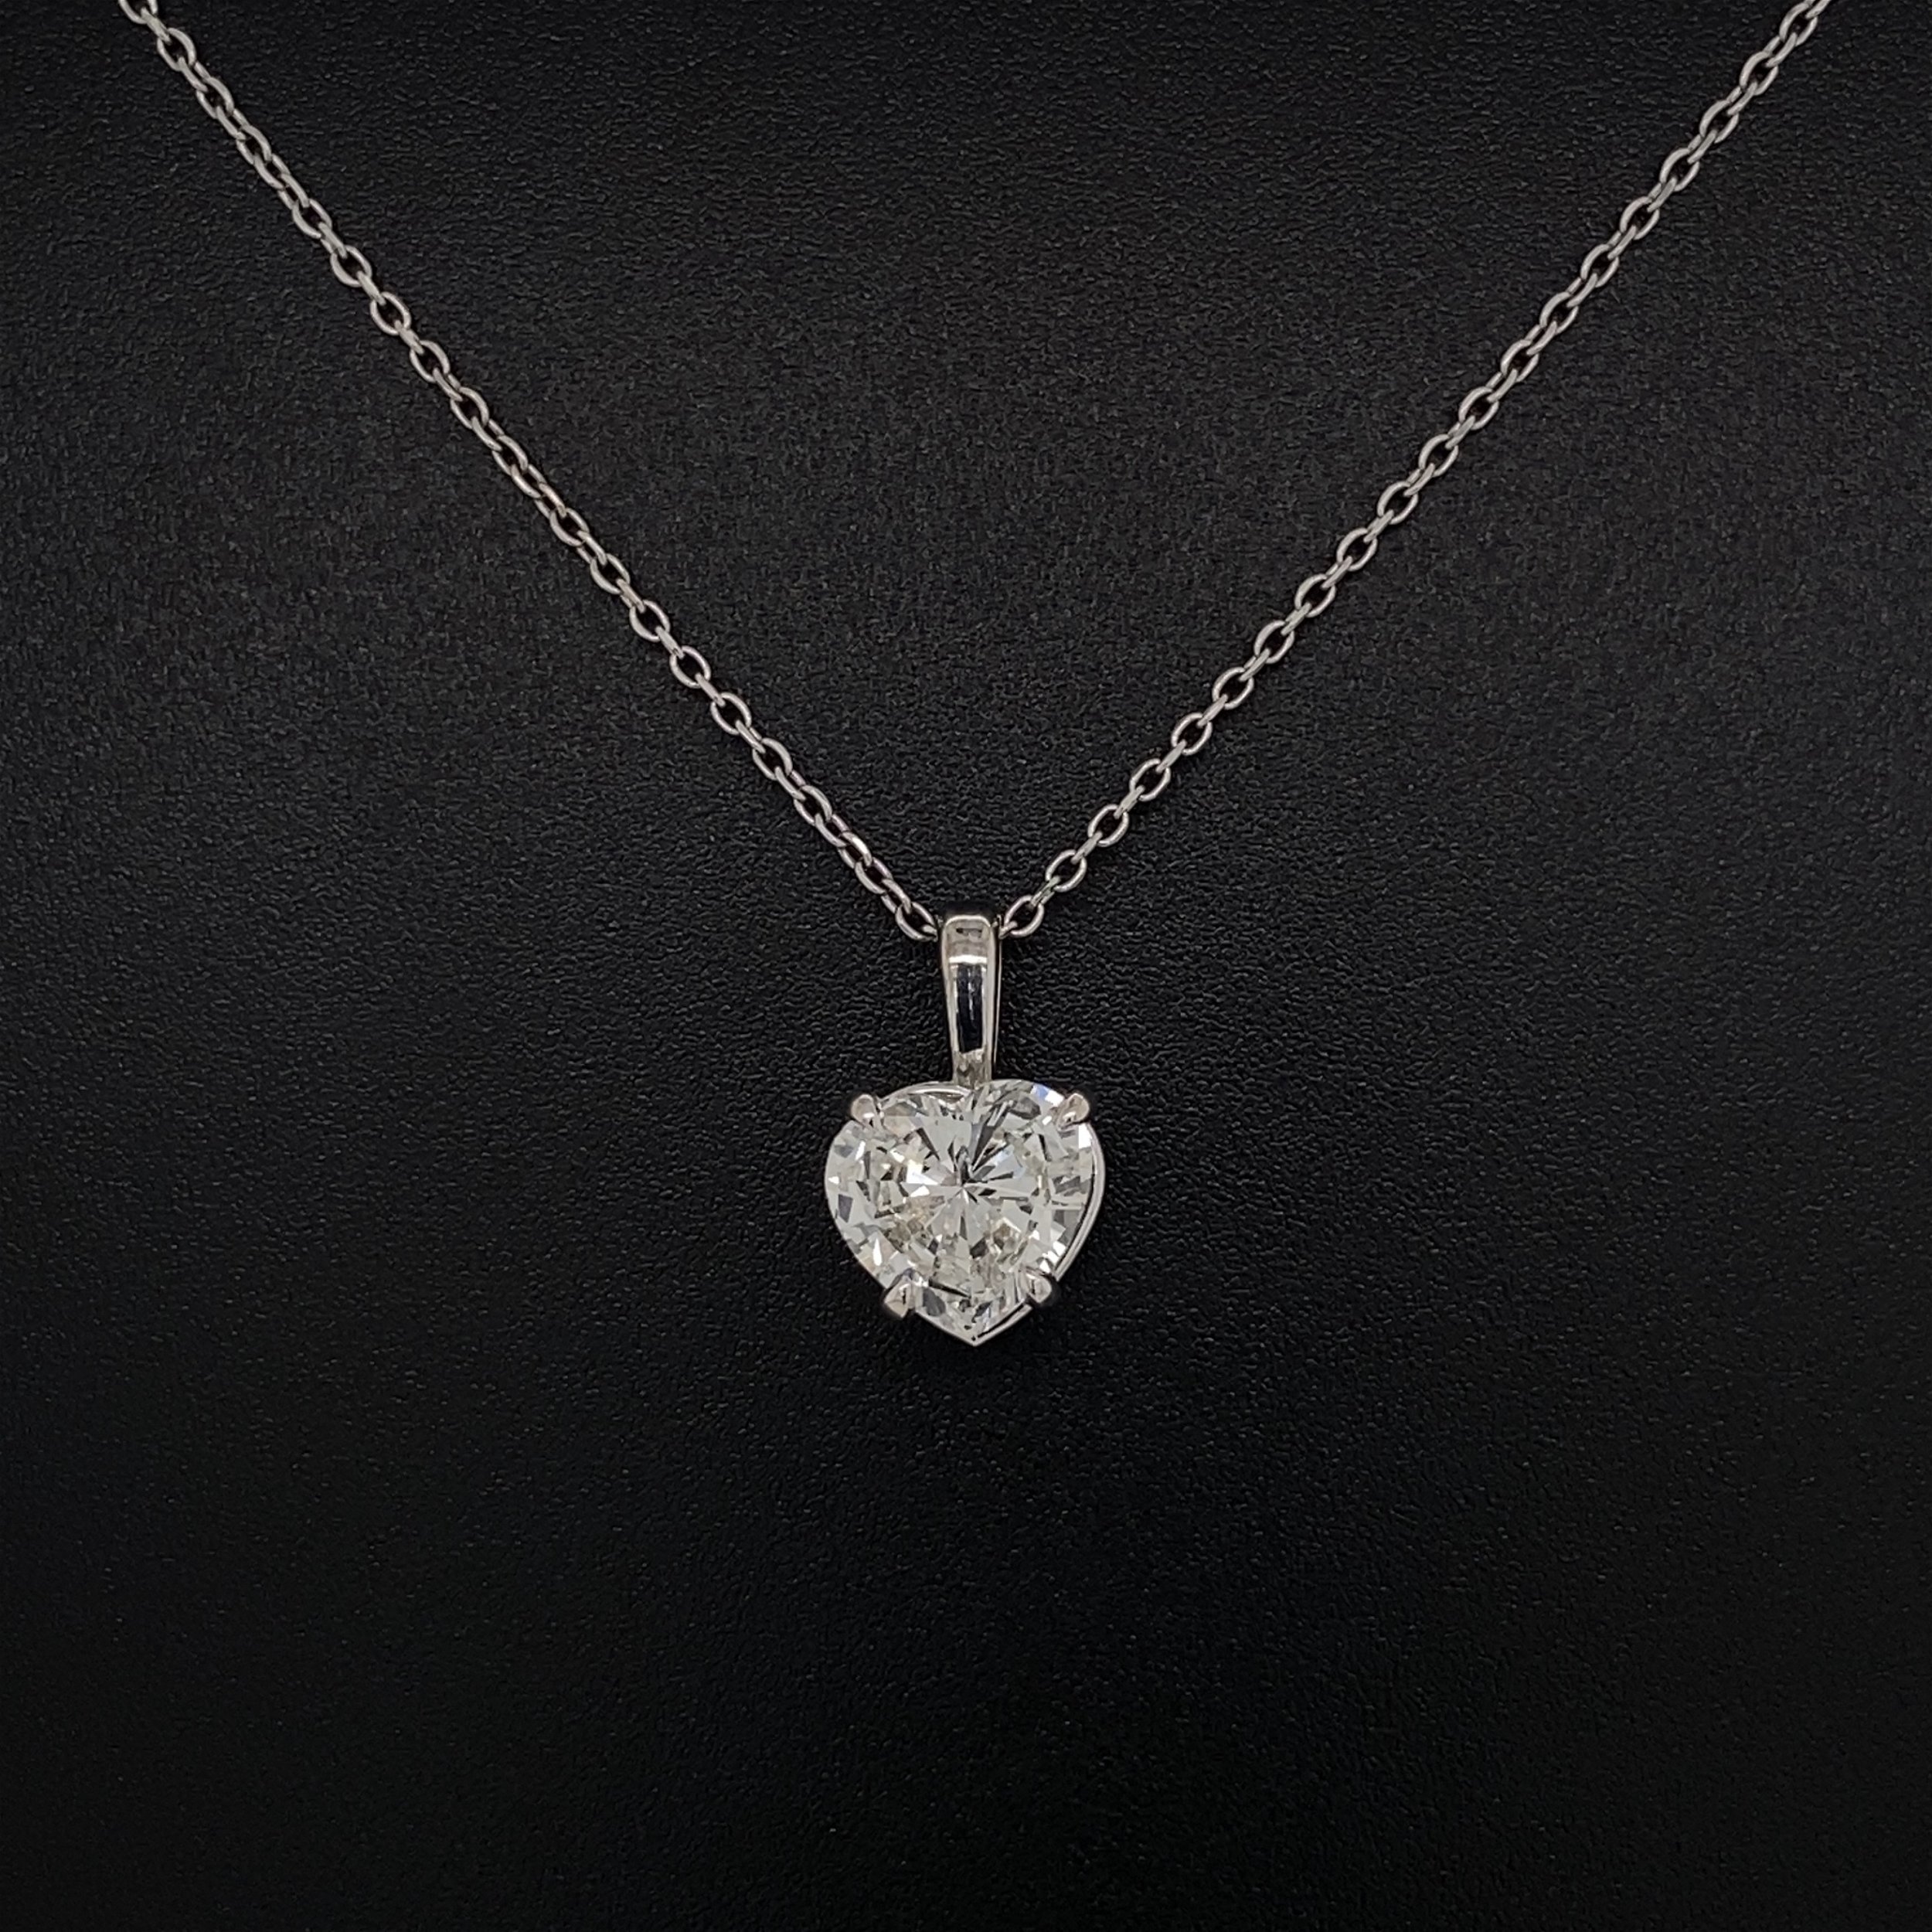 1.26ct Heart Shape Diamond H-SI2 GIA in Solitaire 14K WG Pendant 2.1g, 16" Chain